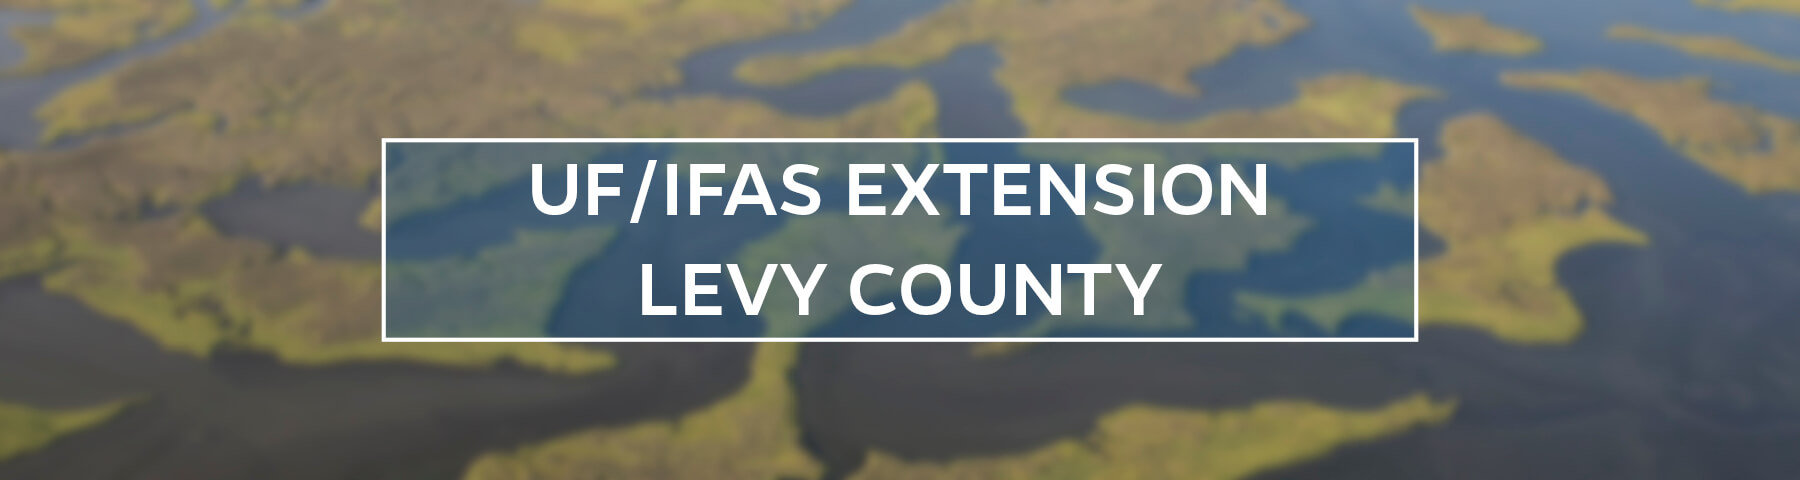 UF/IFAS Extension Levy County